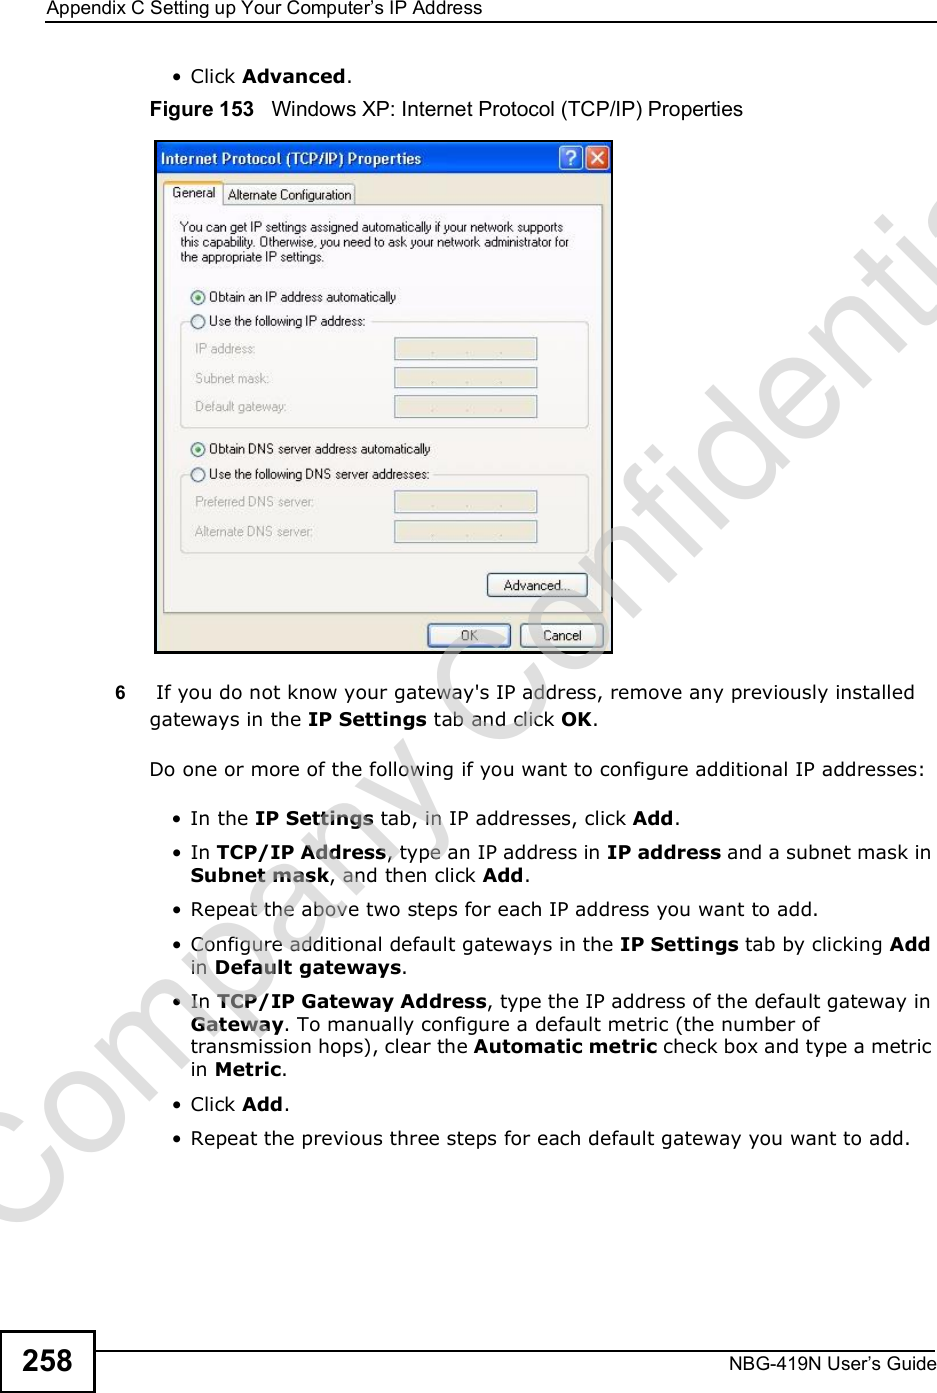 Appendix CSetting up Your Computer s IP AddressNBG-419N User s Guide258 Click Advanced.Figure 153   Windows XP: Internet Protocol (TCP/IP) Properties6 If you do not know your gateway&apos;s IP address, remove any previously installed gateways in the IP Settings tab and click OK.Do one or more of the following if you want to configure additional IP addresses: In the IP Settings tab, in IP addresses, click Add. In TCP/IP Address, type an IP address in IP address and a subnet mask in Subnet mask, and then click Add. Repeat the above two steps for each IP address you want to add. Configure additional default gateways in the IP Settings tab by clicking Add in Default gateways. In TCP/IP Gateway Address, type the IP address of the default gateway in Gateway. To manually configure a default metric (the number of transmission hops), clear the Automatic metric check box and type a metric in Metric. Click Add.  Repeat the previous three steps for each default gateway you want to add.Company Confidential